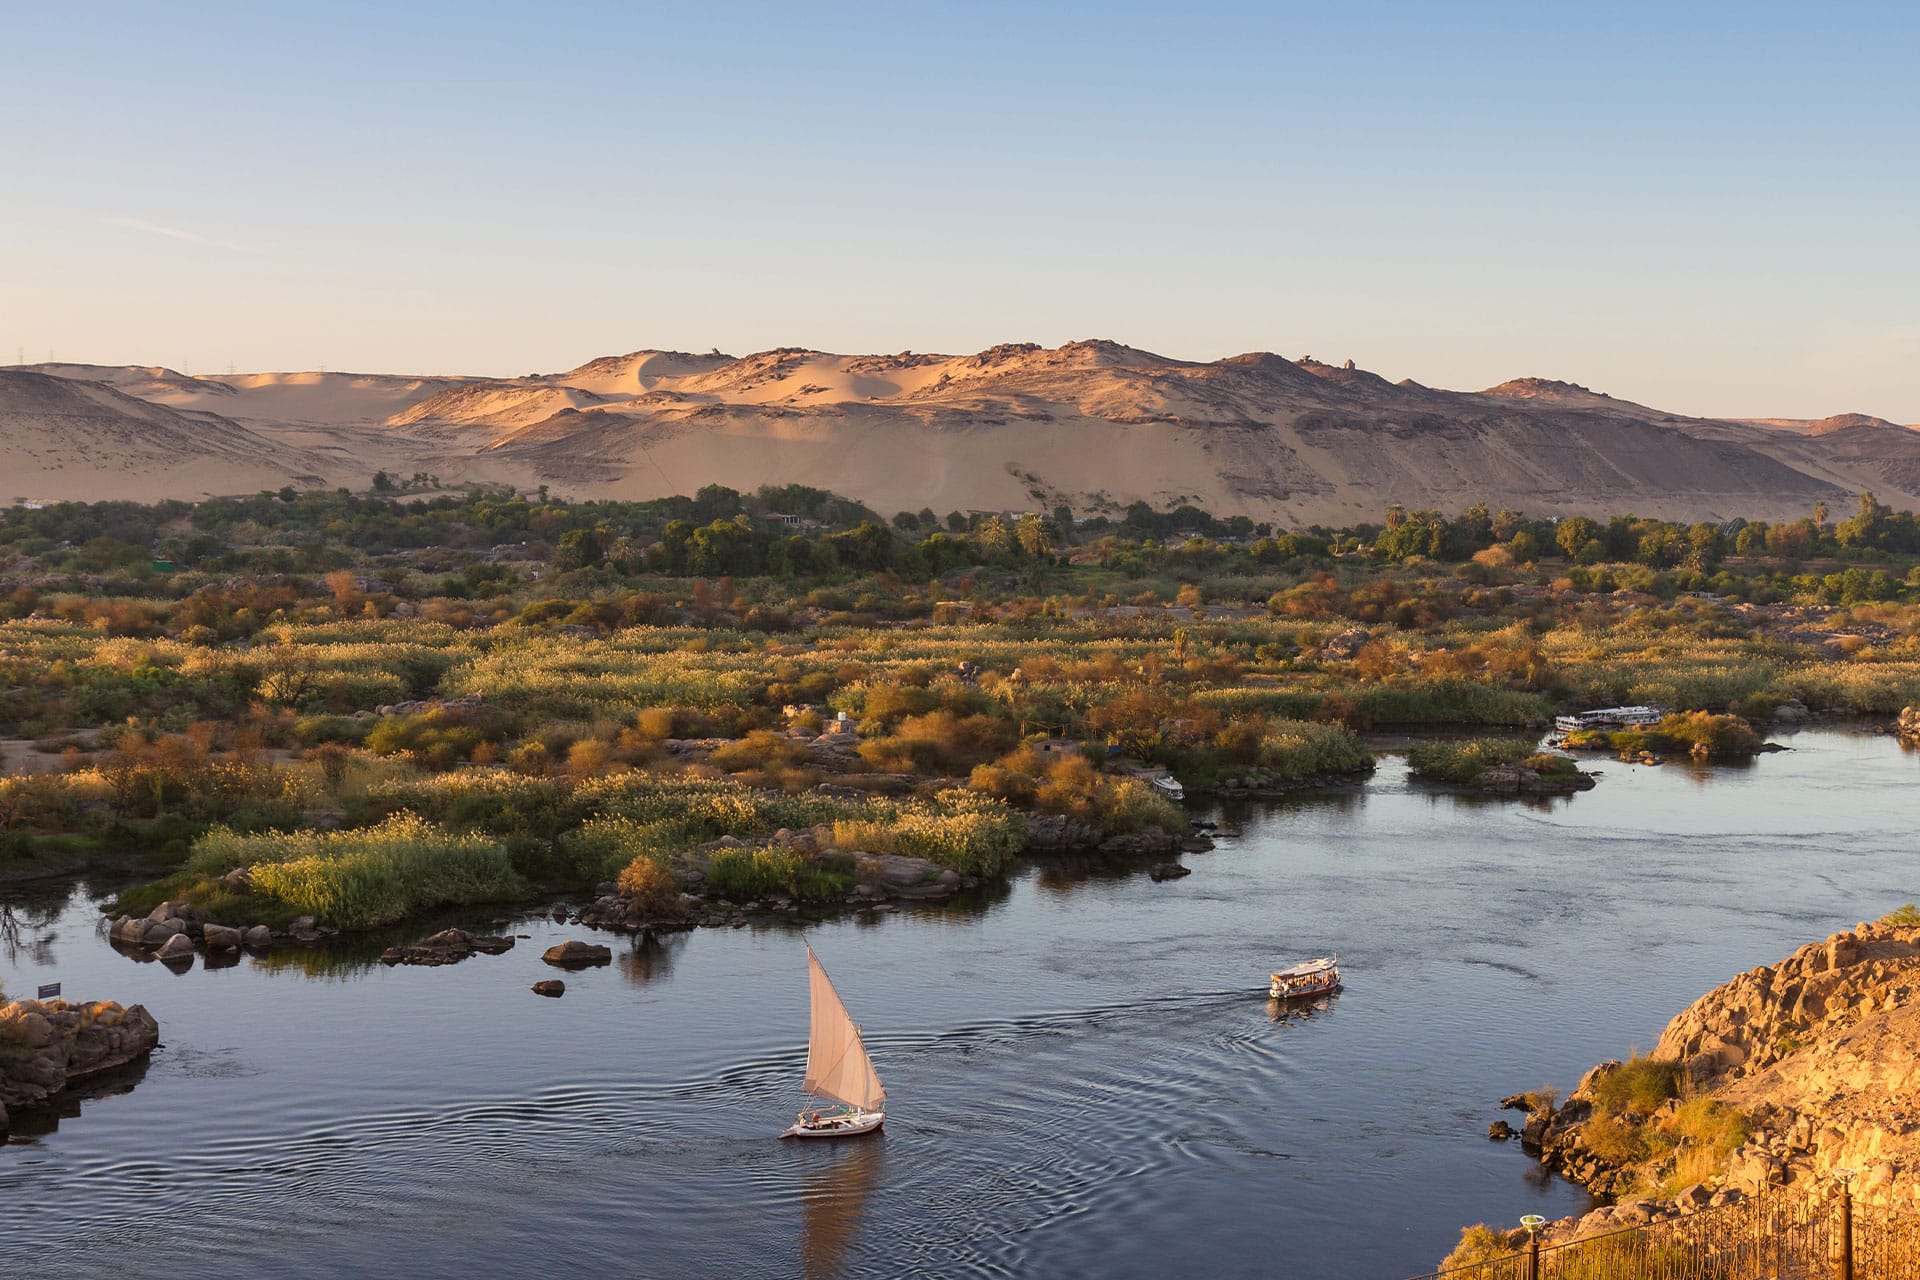 The Nile River – one of the top attractions in Egypt.